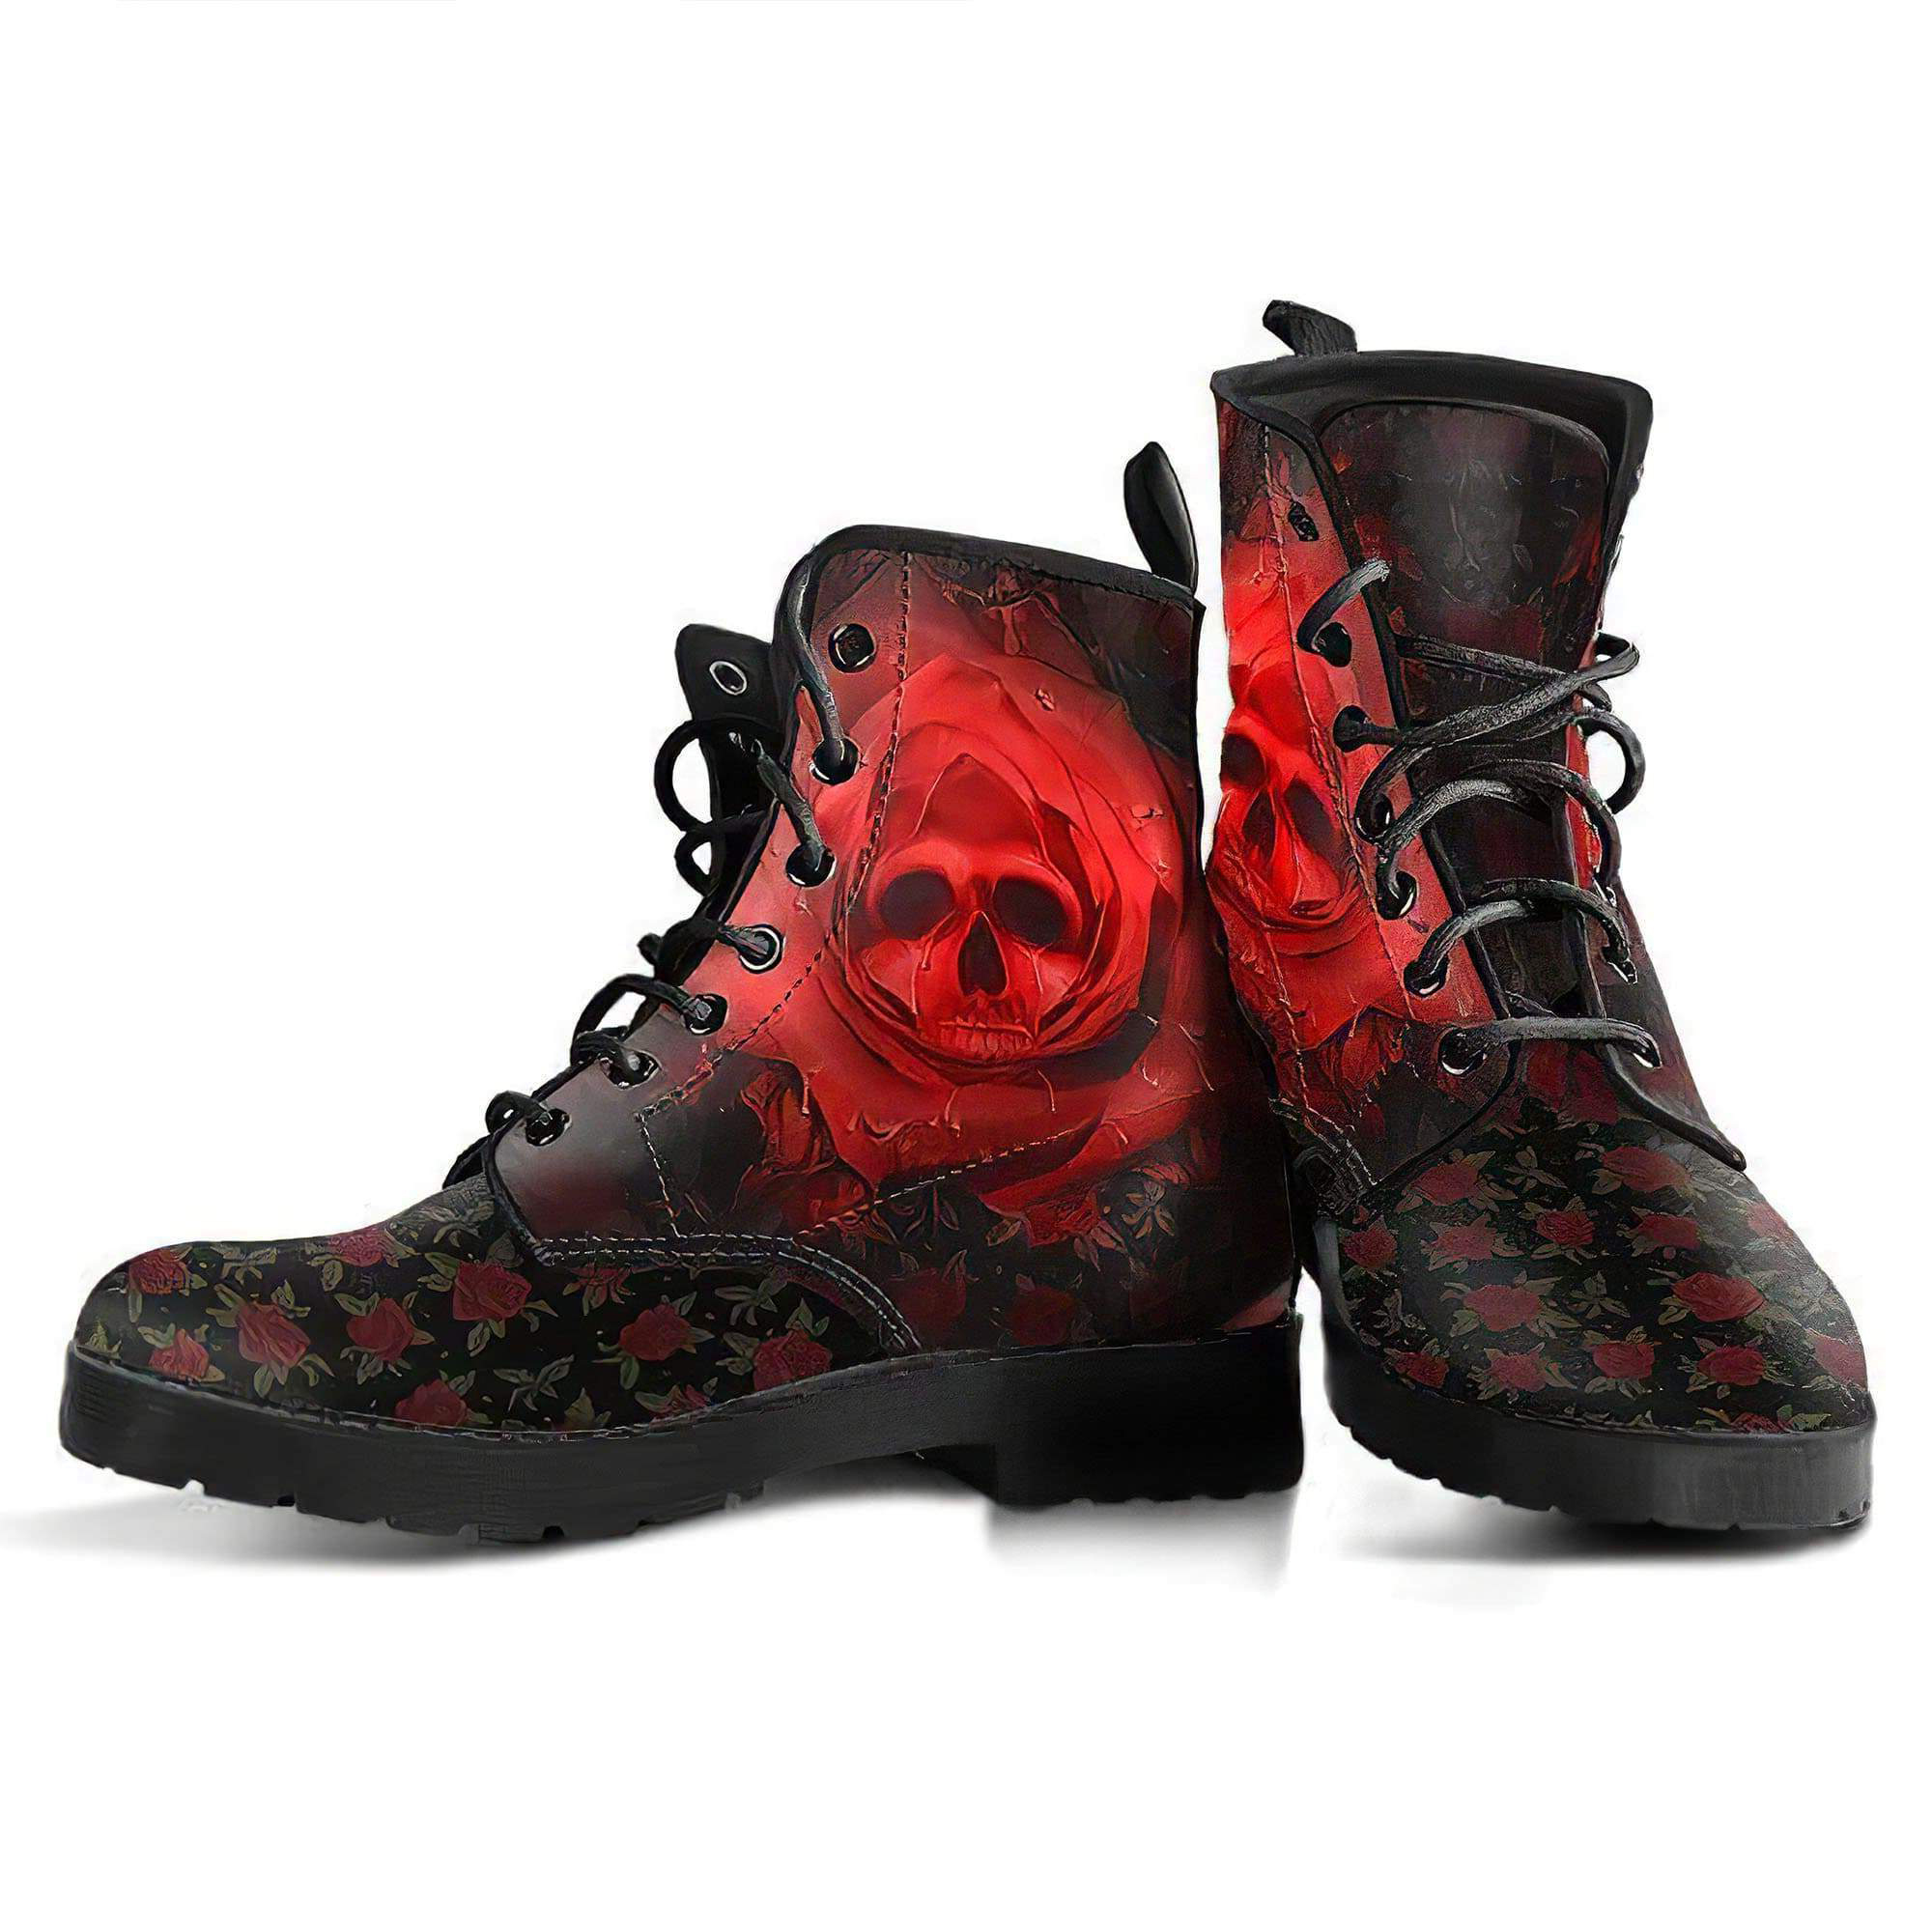 rose-skull-women-s-leather-boots-women-s-leather-boots-12051946045501.jpg